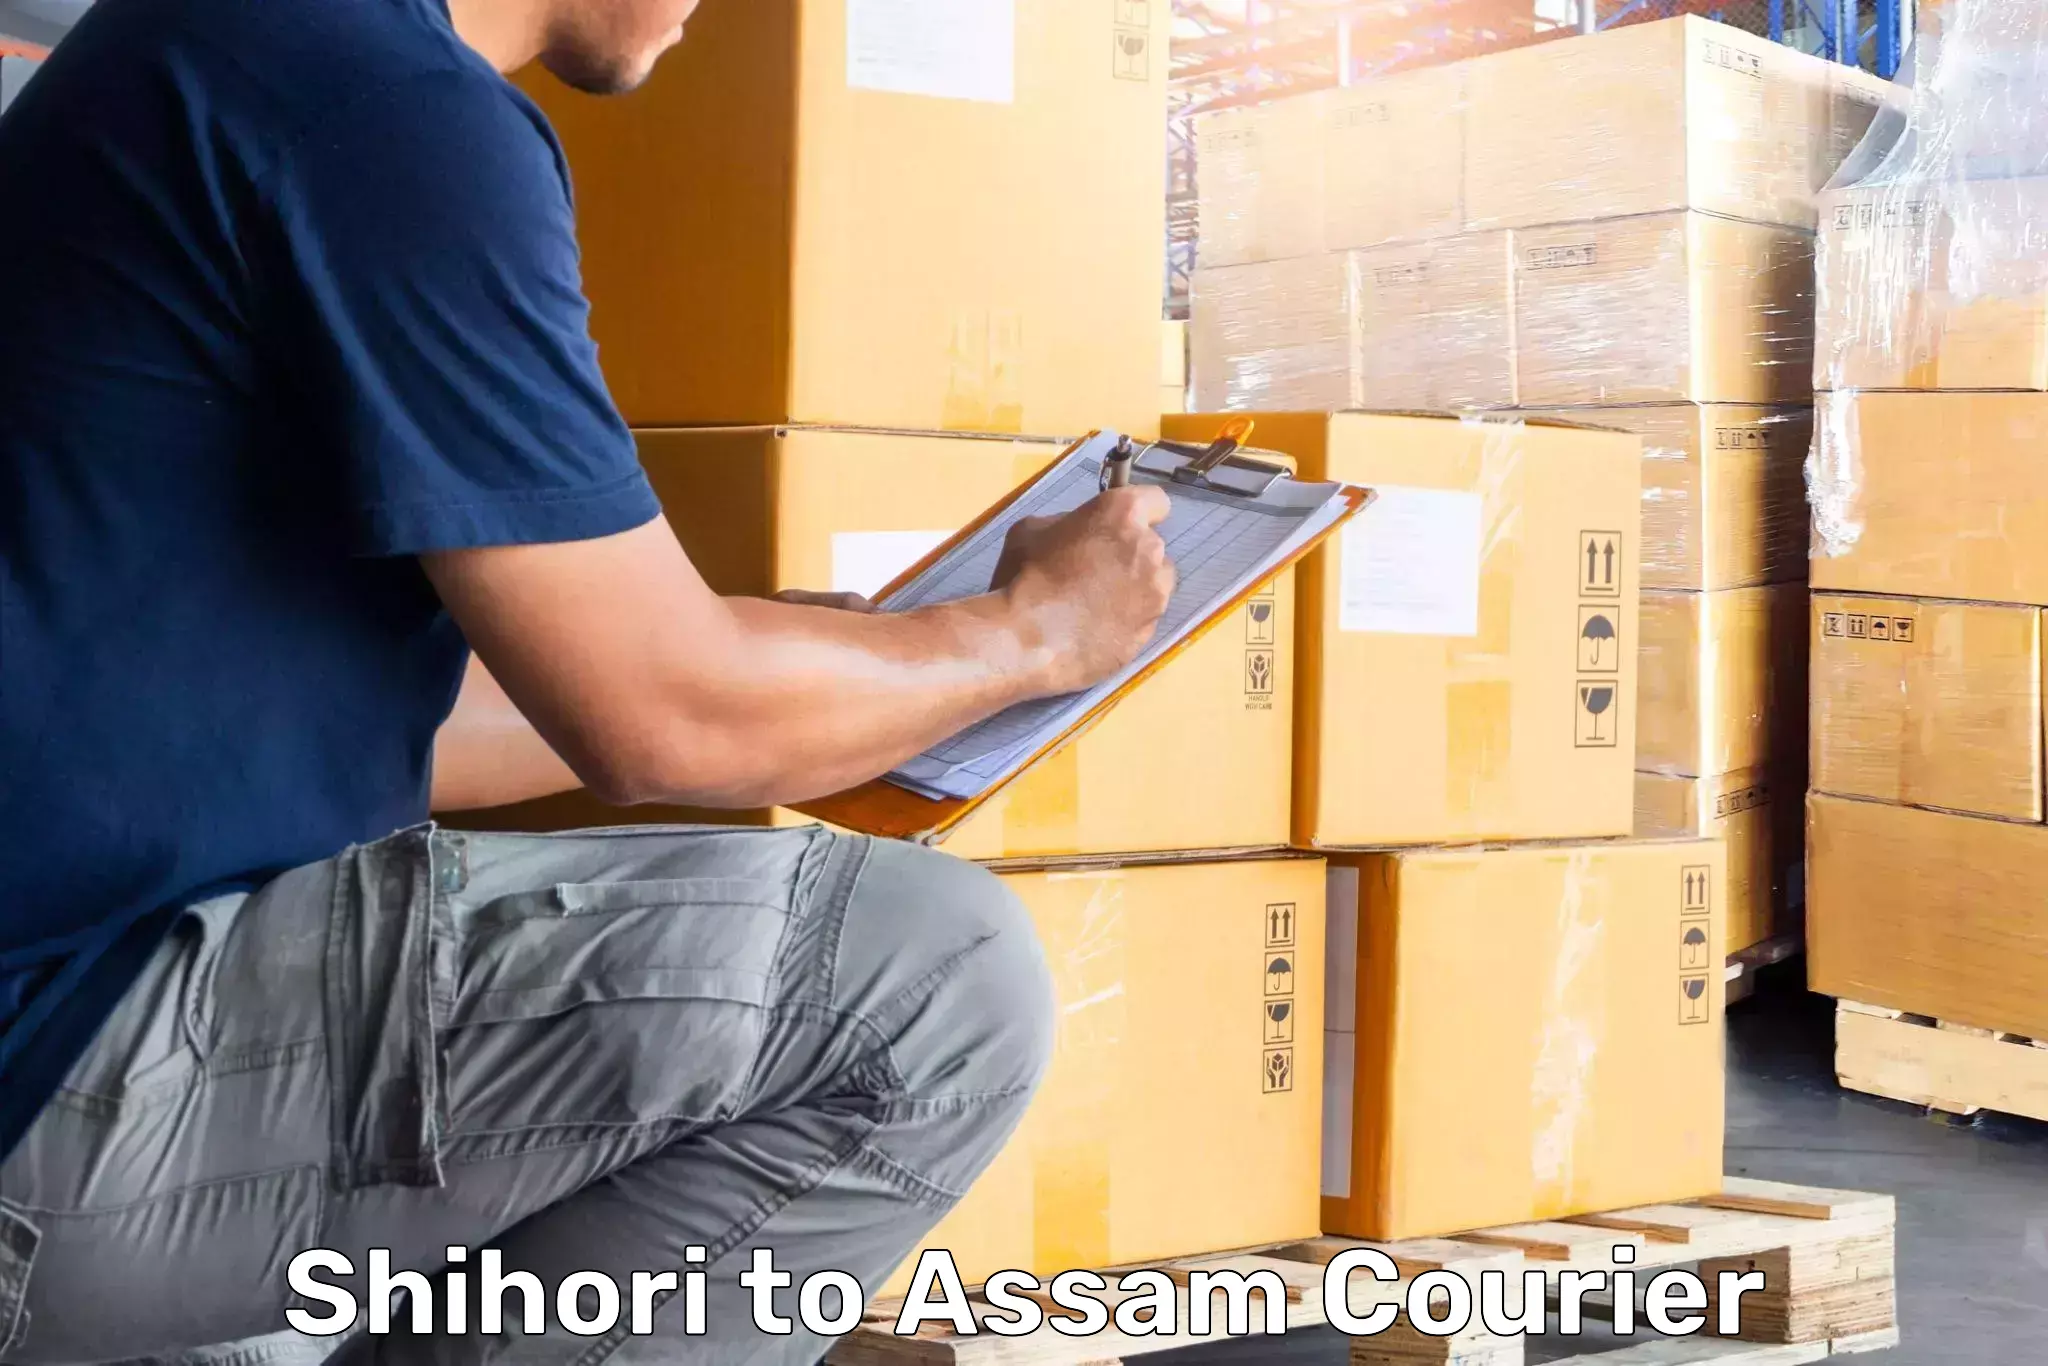 Online luggage shipping booking Shihori to Assam